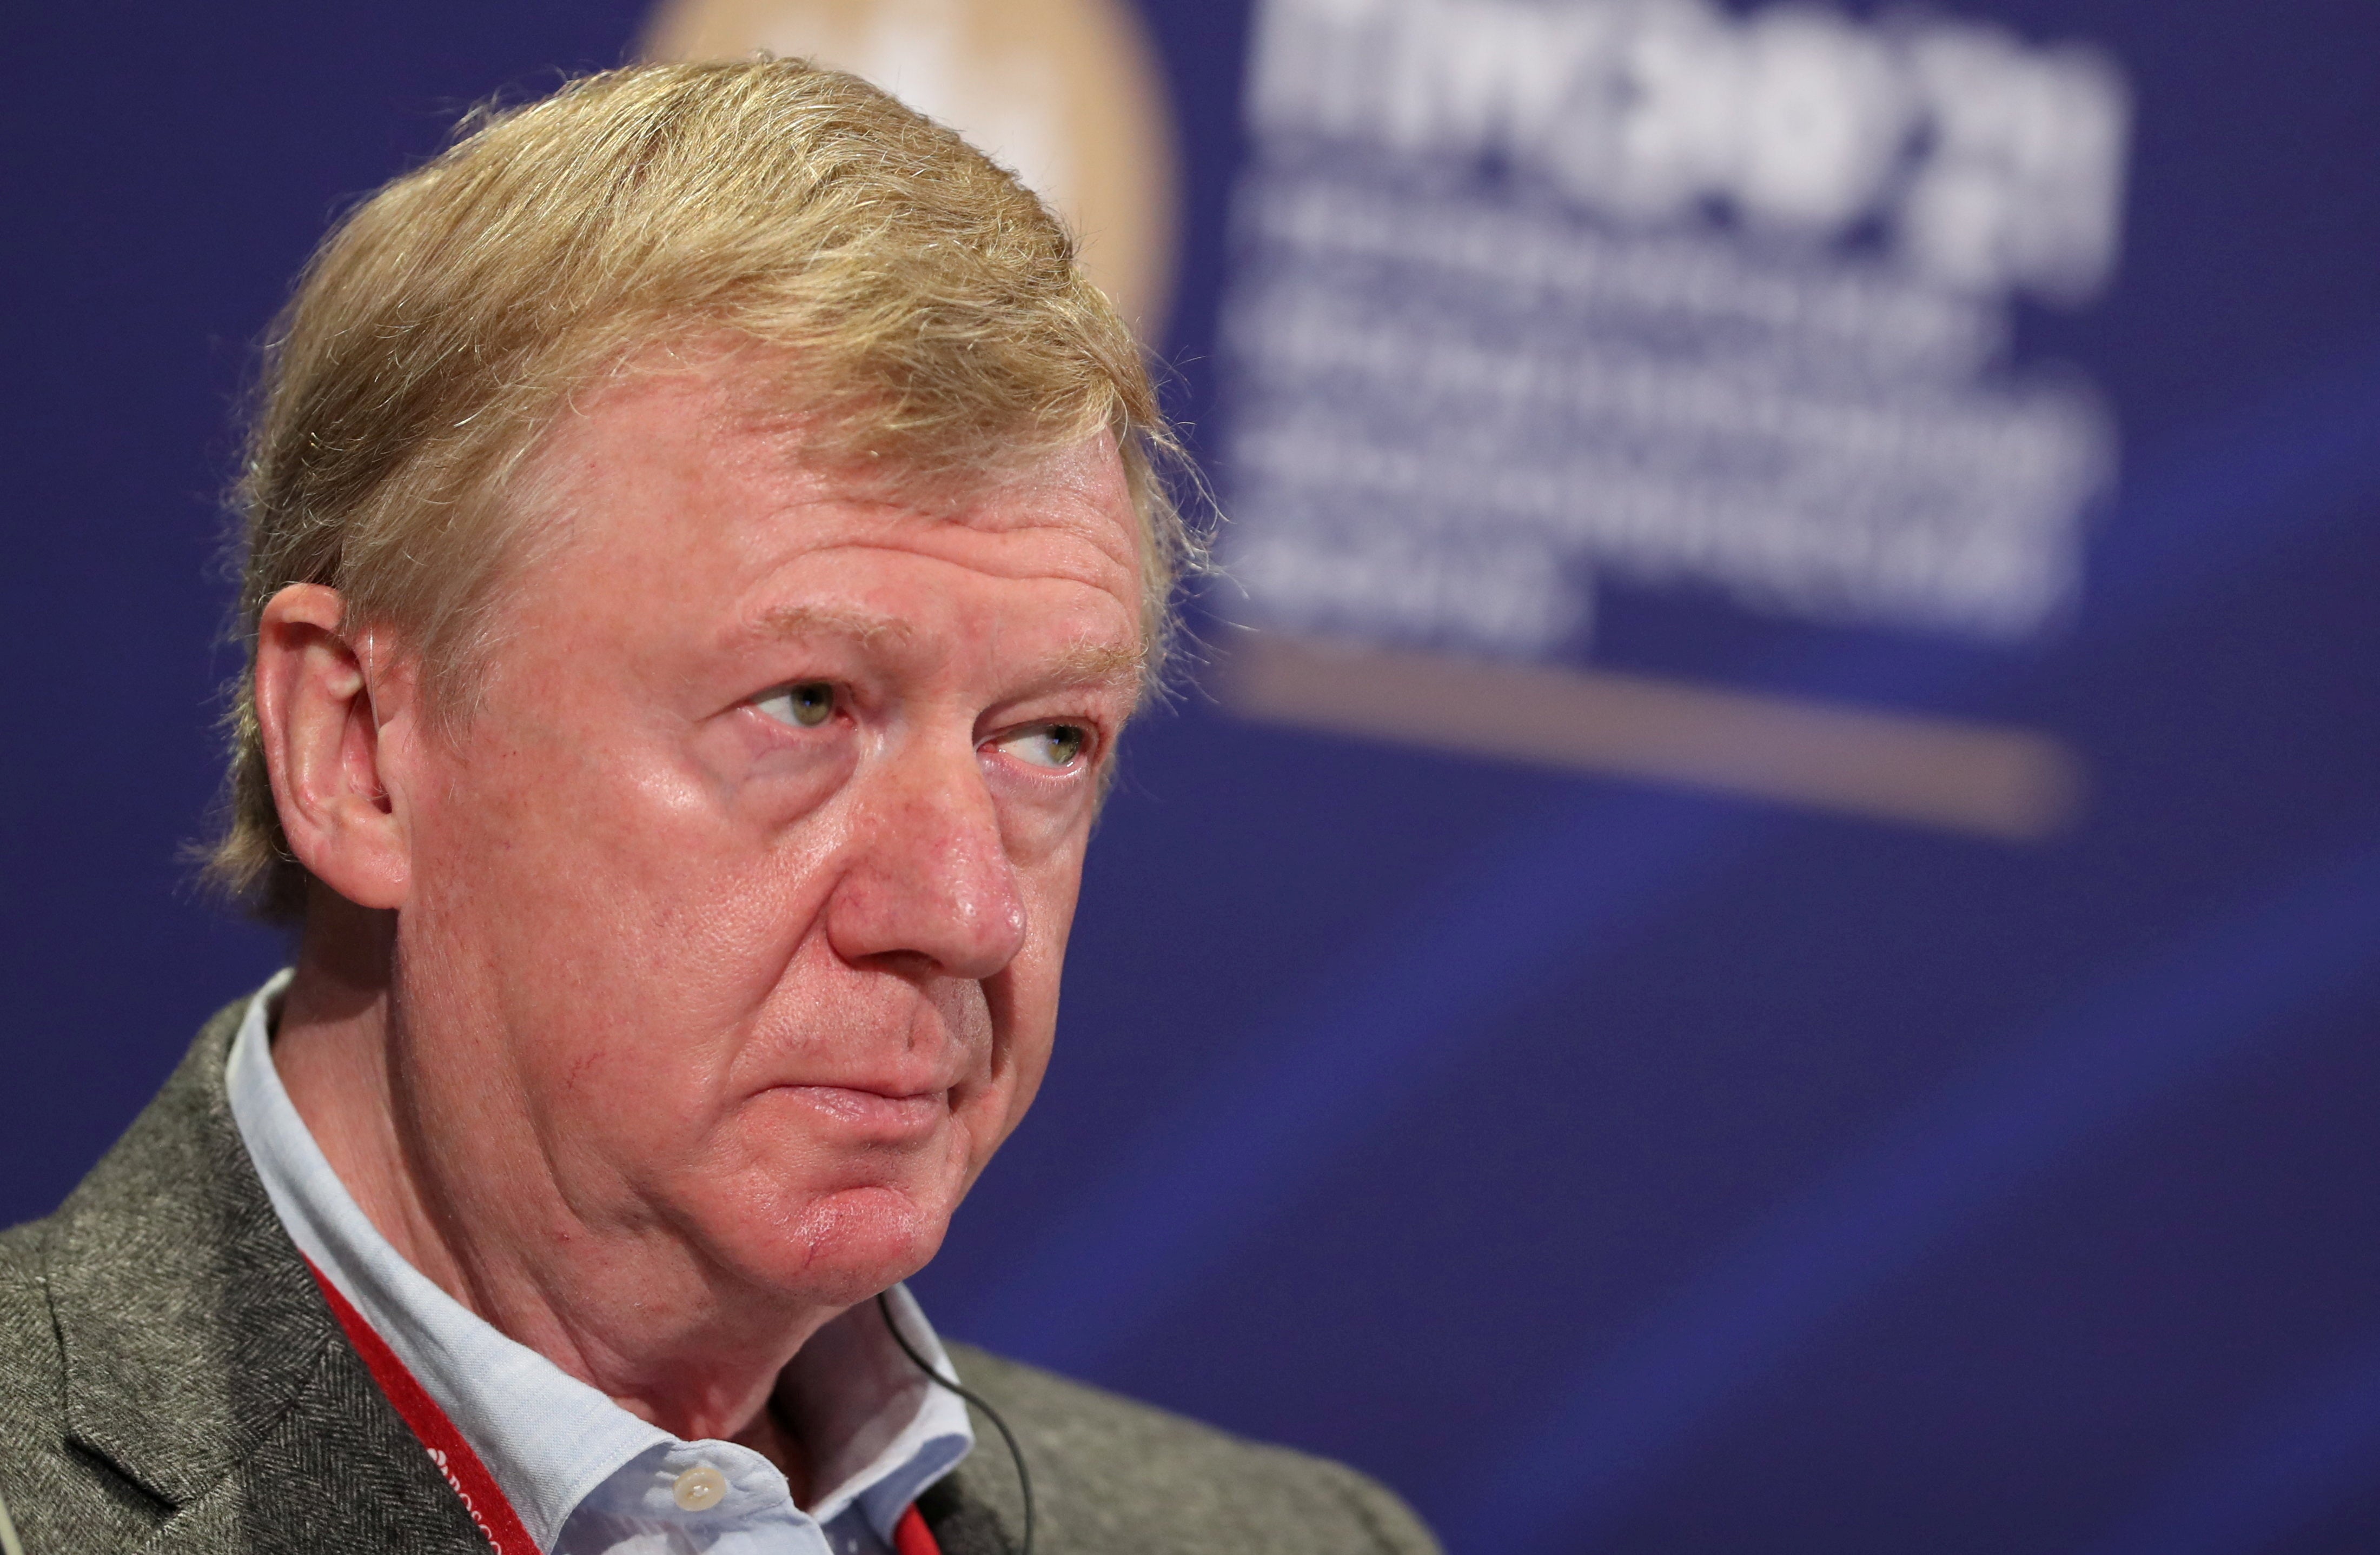 Anatoly Chubais, 66, is thought to have left Russia